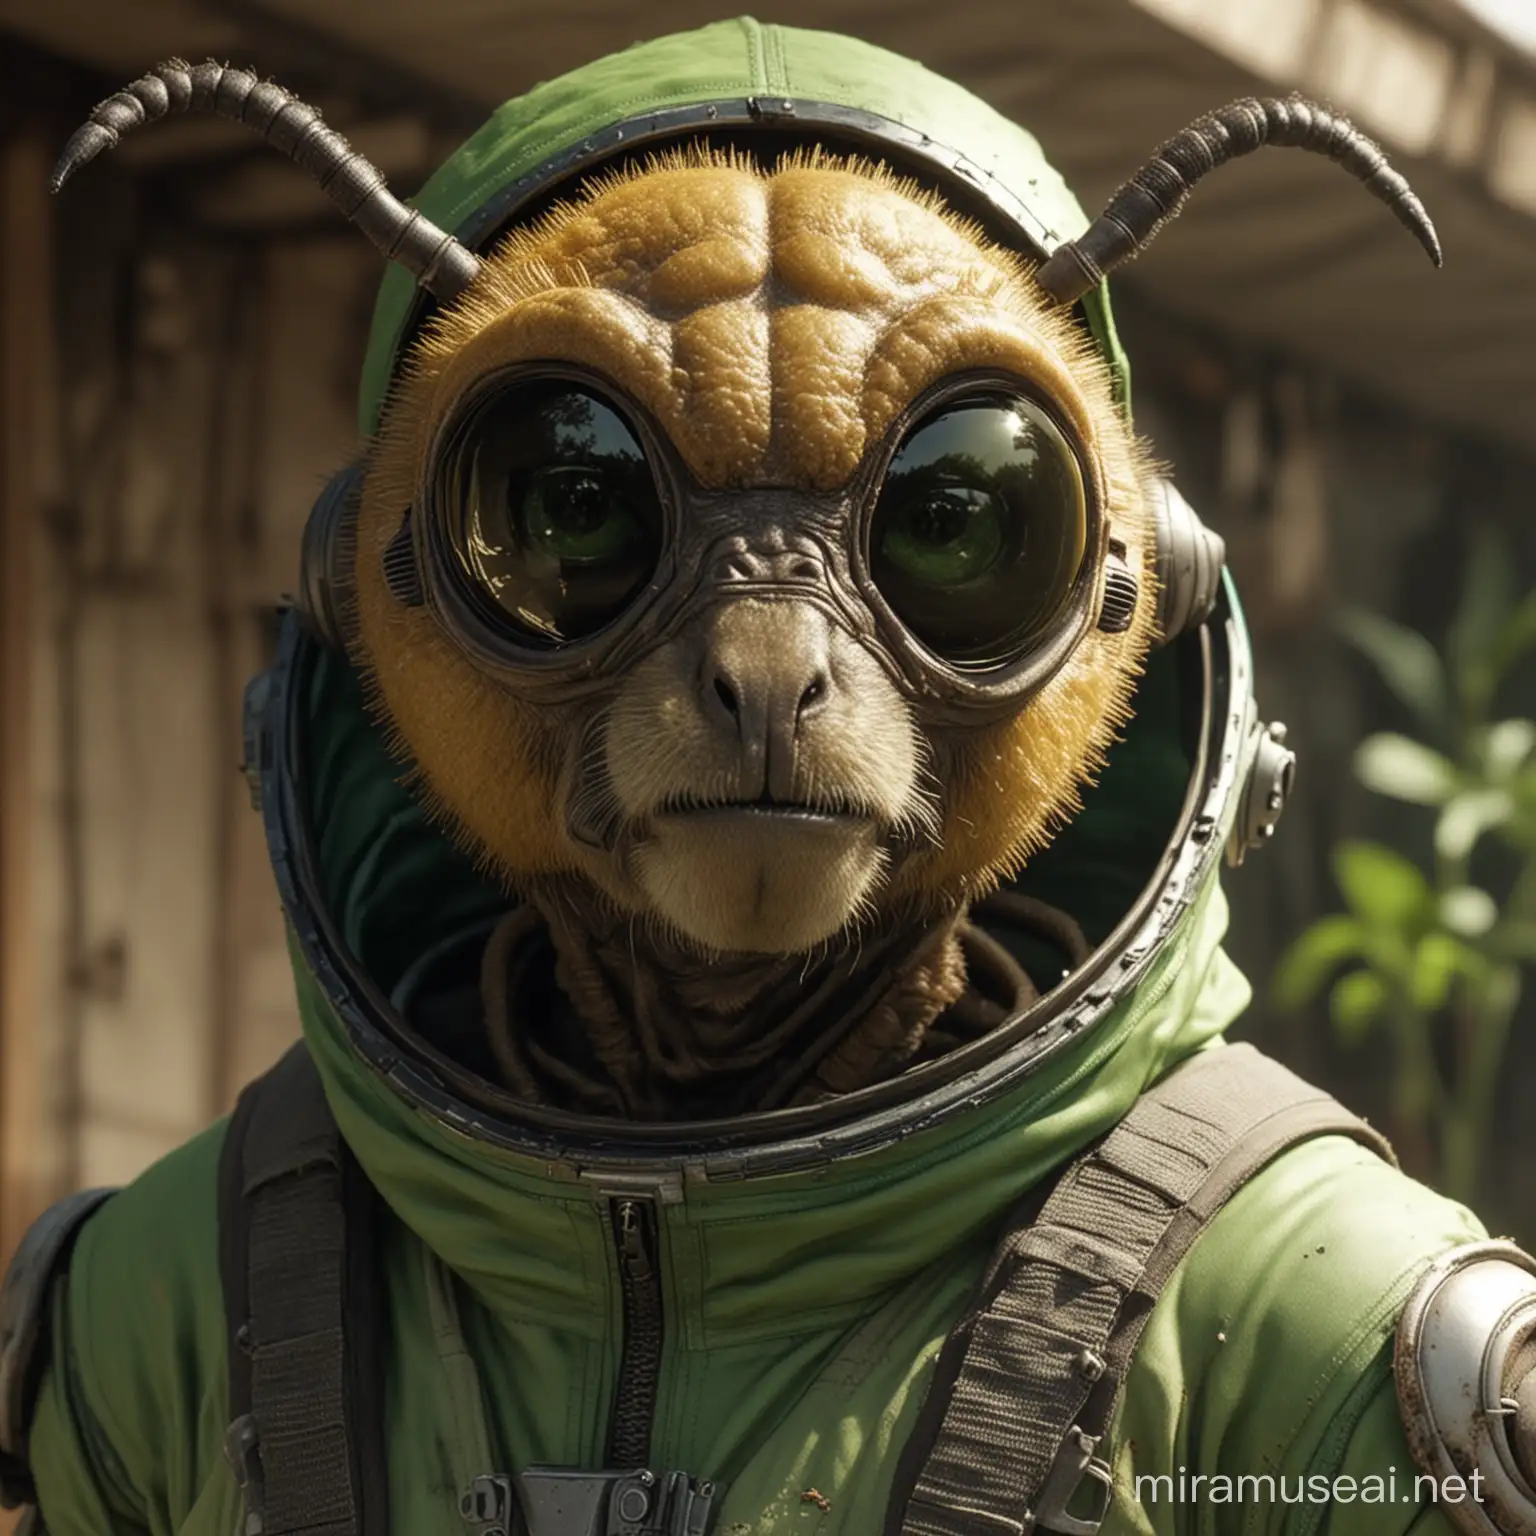 Dirty bee-alien who looks like a bee, works as a botanist, not a human, wears green jumpsuit, sci-fi setting, close-up portrait 3/4, facing camera, has head antenna, no wings